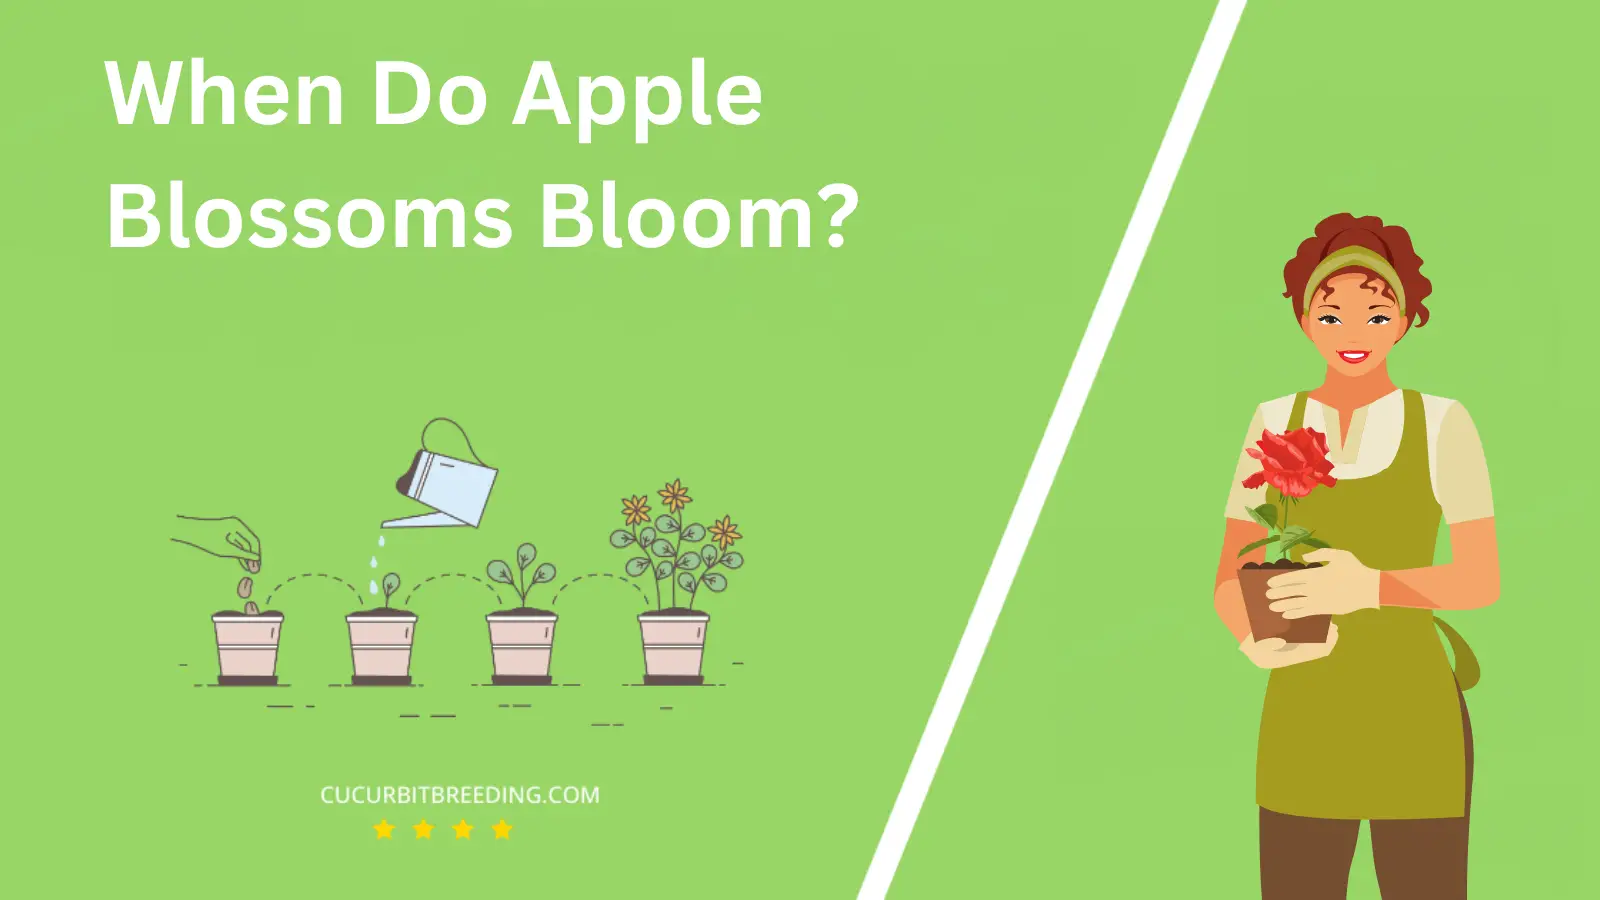 When Do Apple Blossoms Bloom?